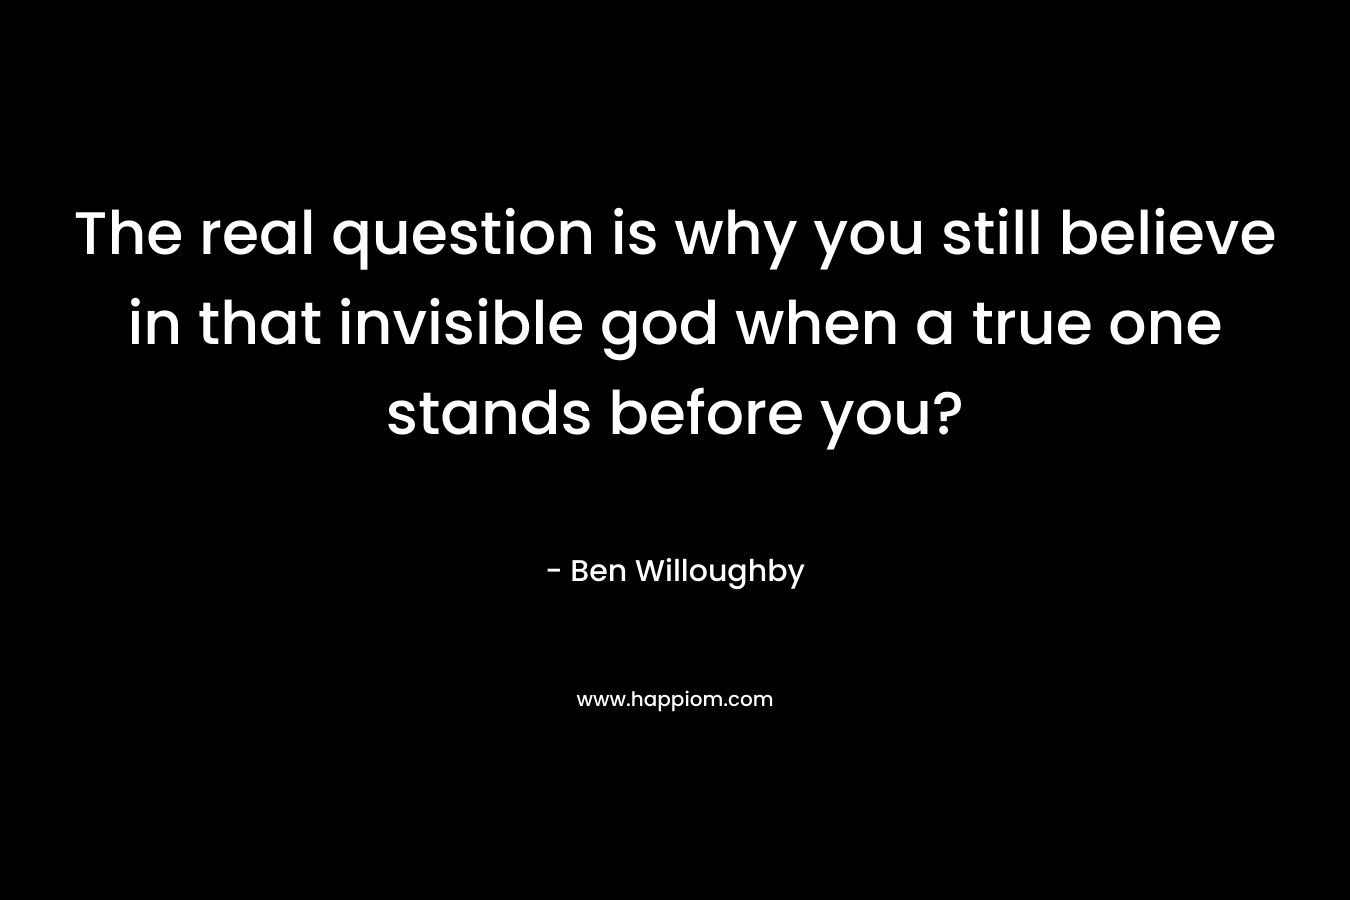 The real question is why you still believe in that invisible god when a true one stands before you?